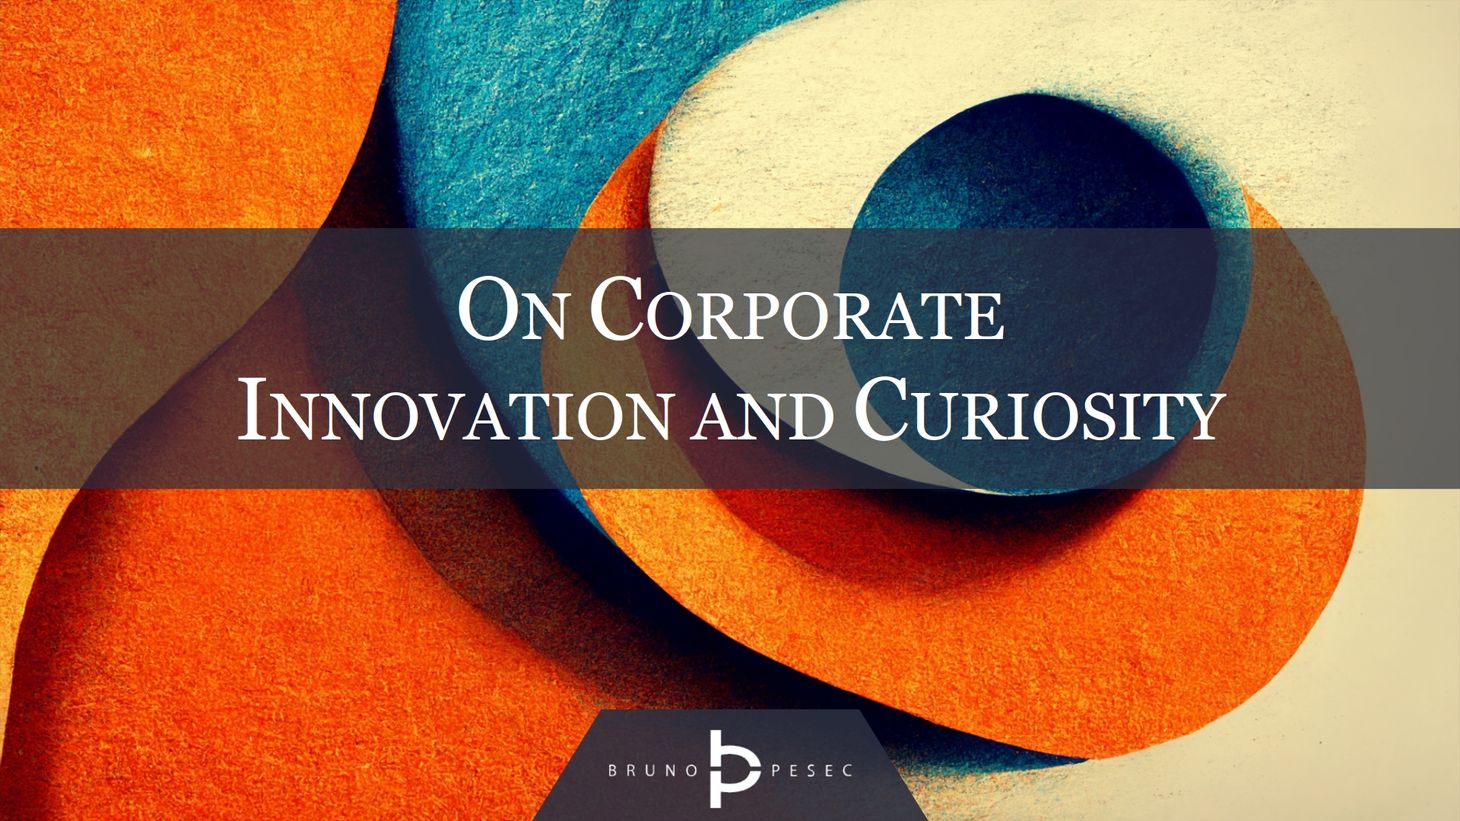 On corporate innovation and curiosity